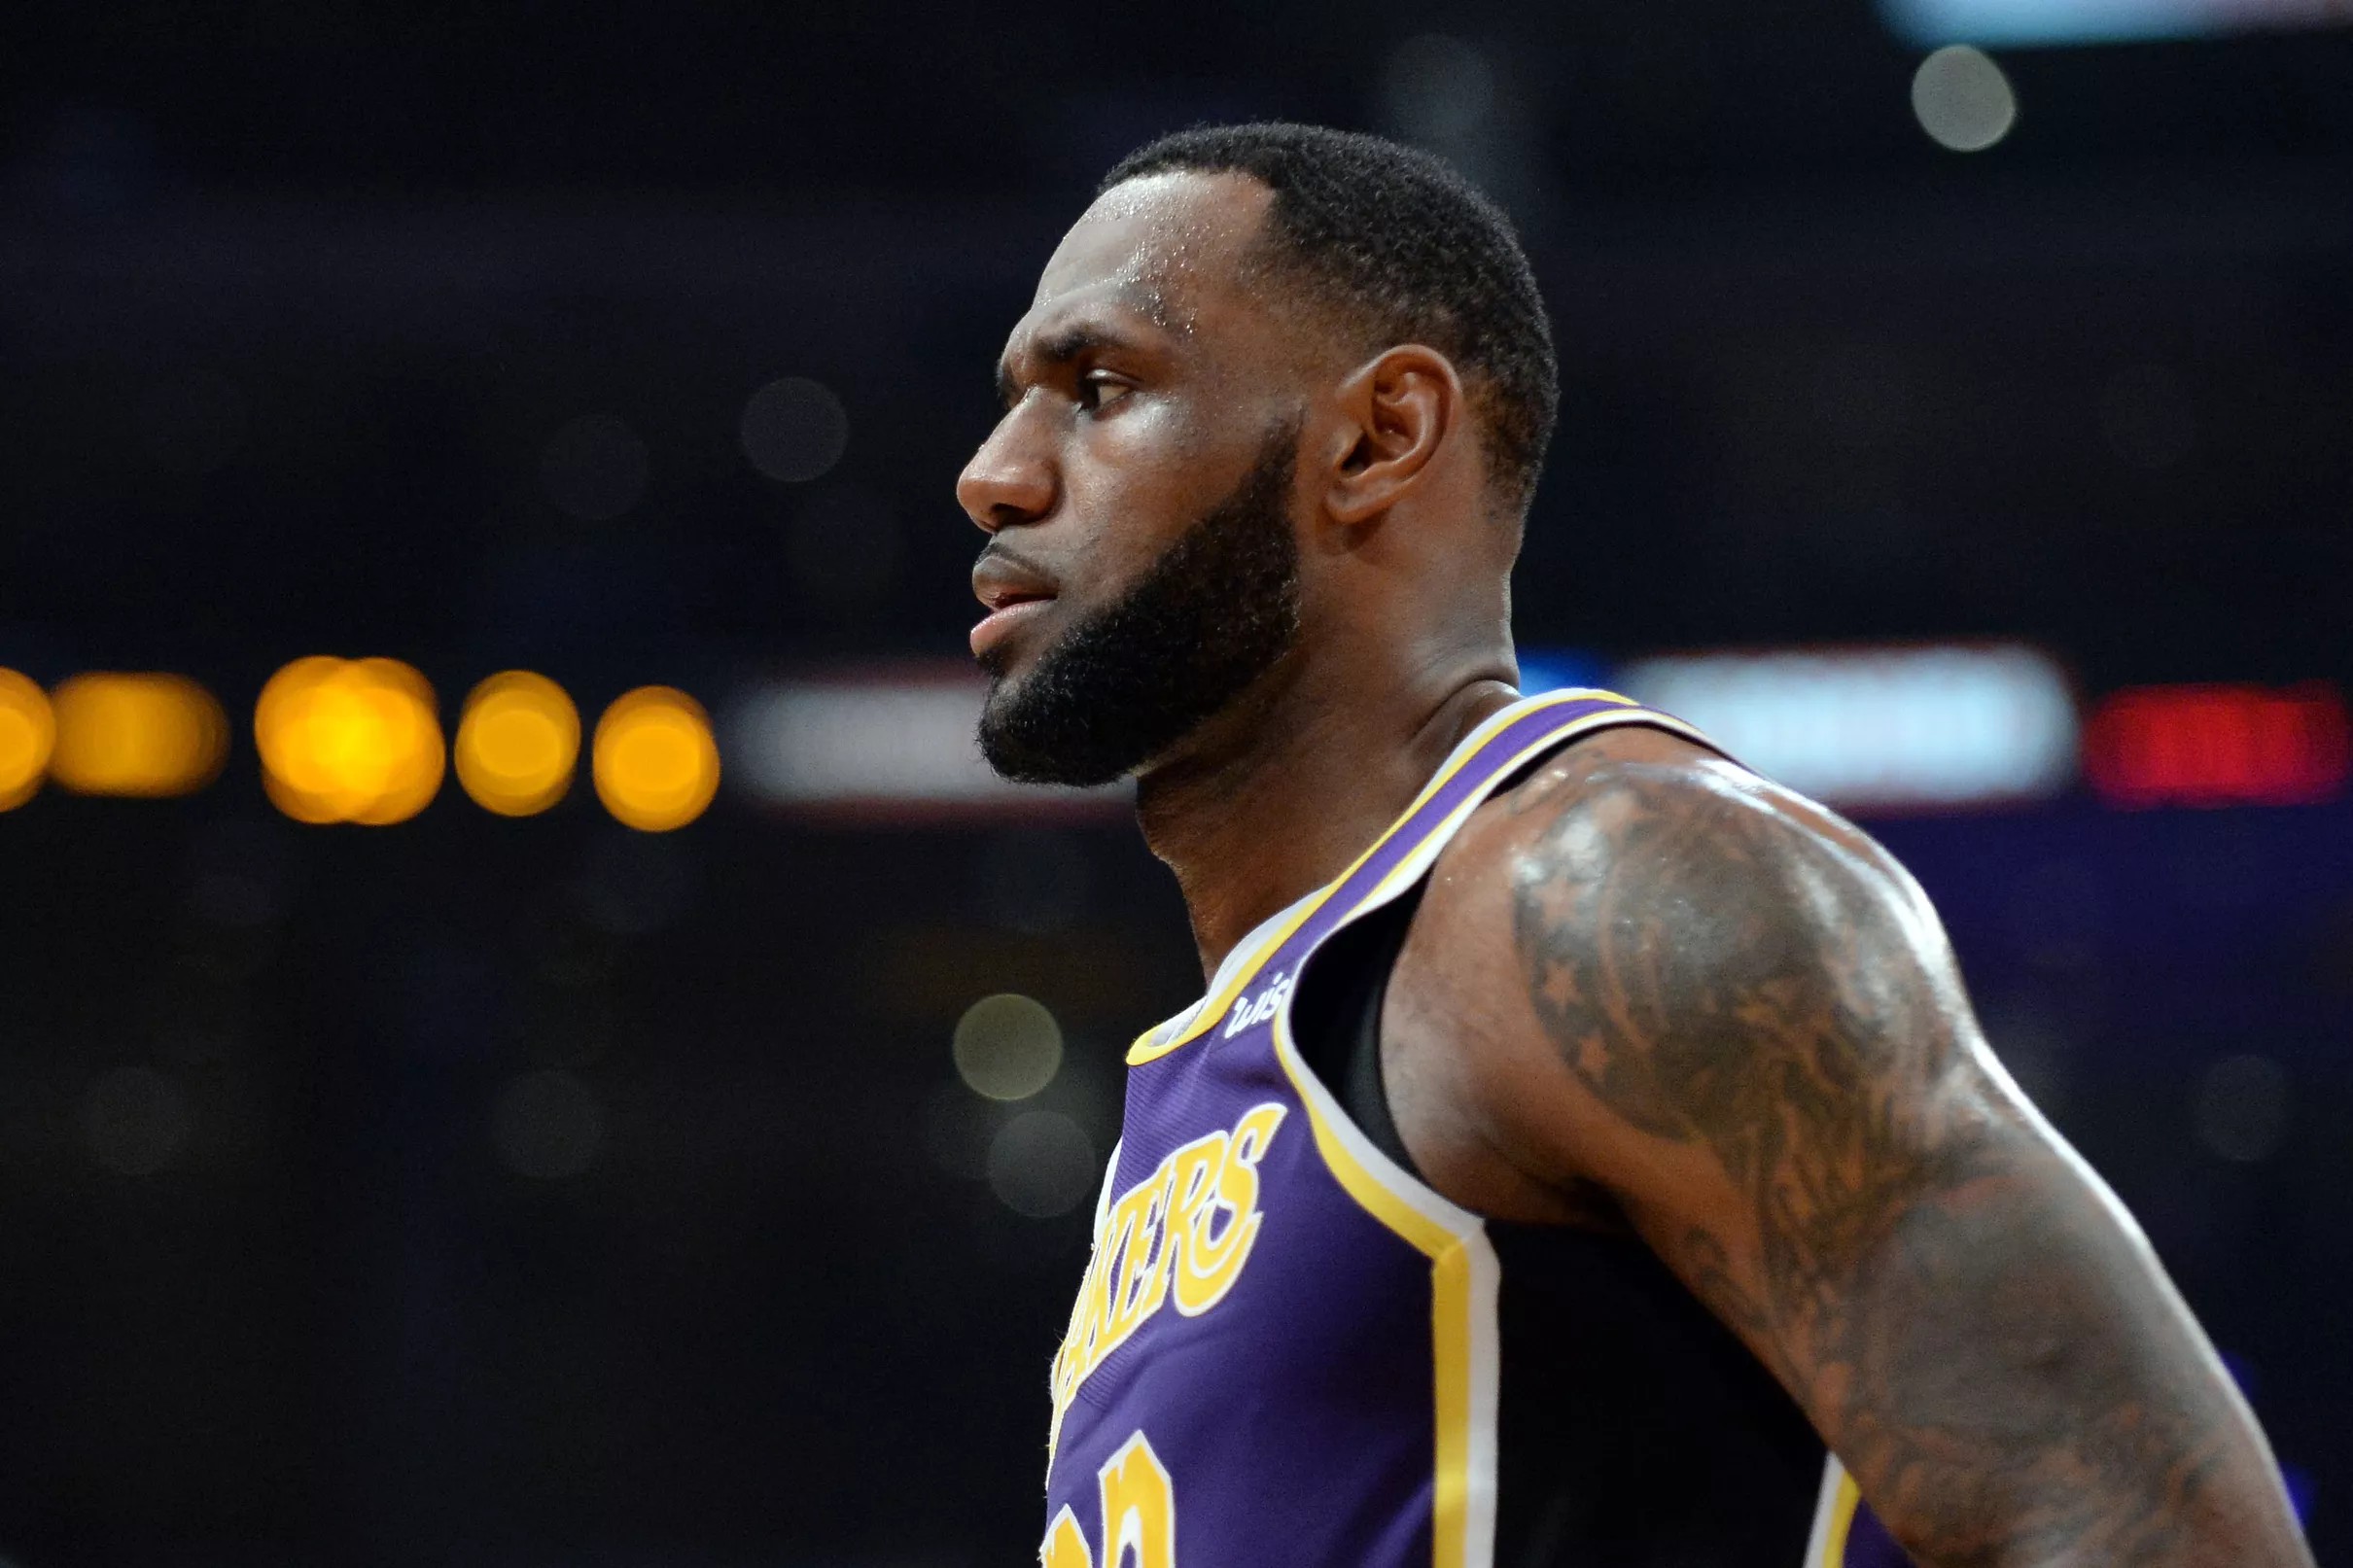 LeBron James wants to be careful and make sure he doesn’t take a step